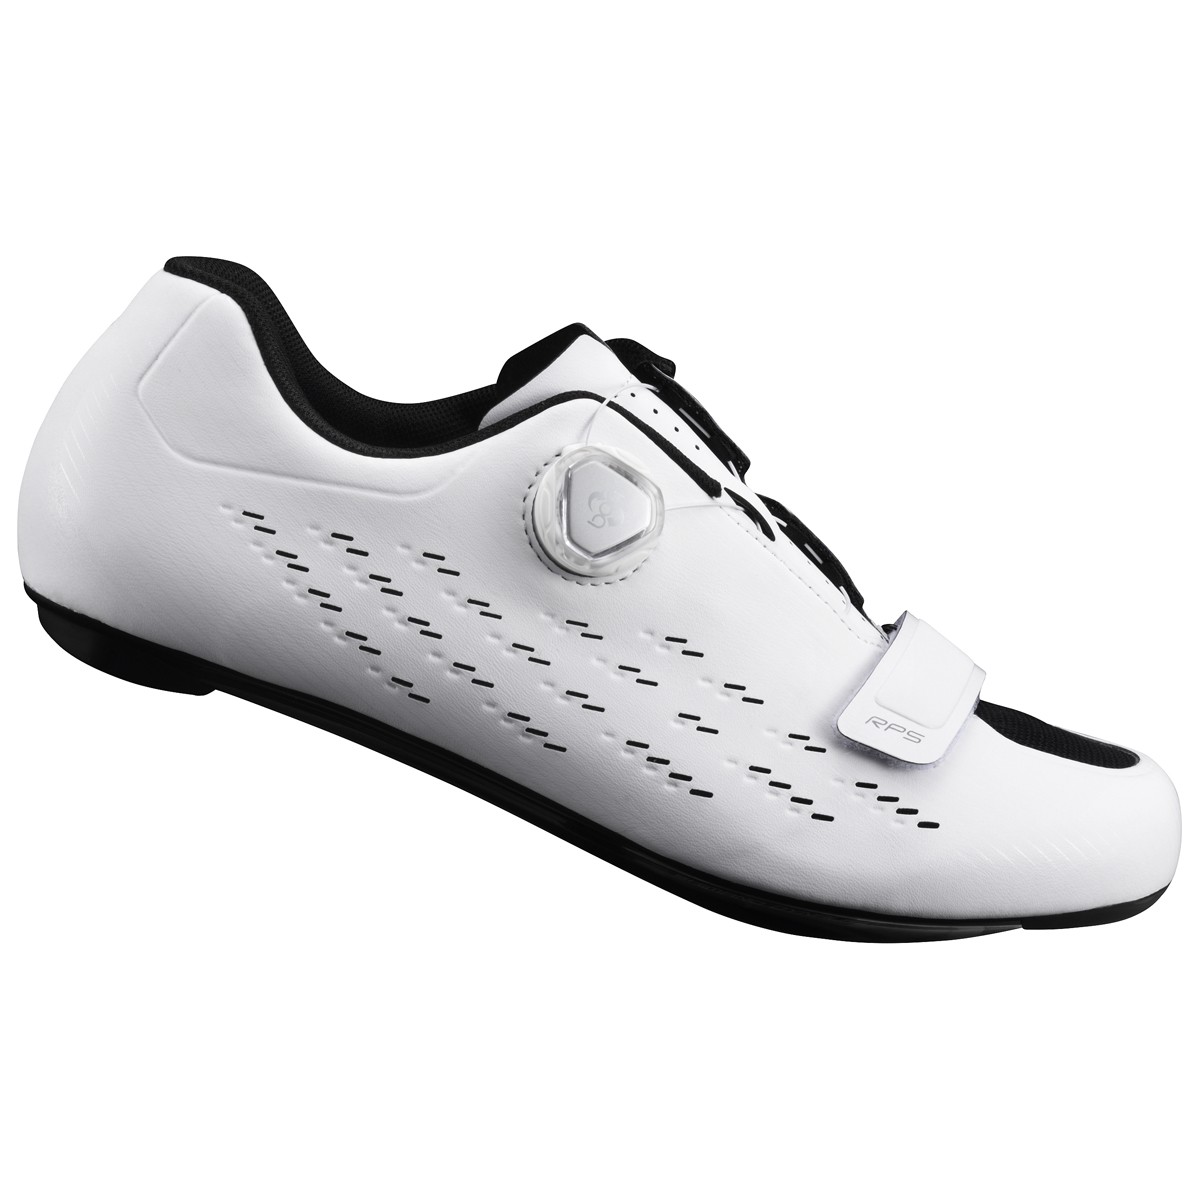 Shimano rp501 chaussures route blanc